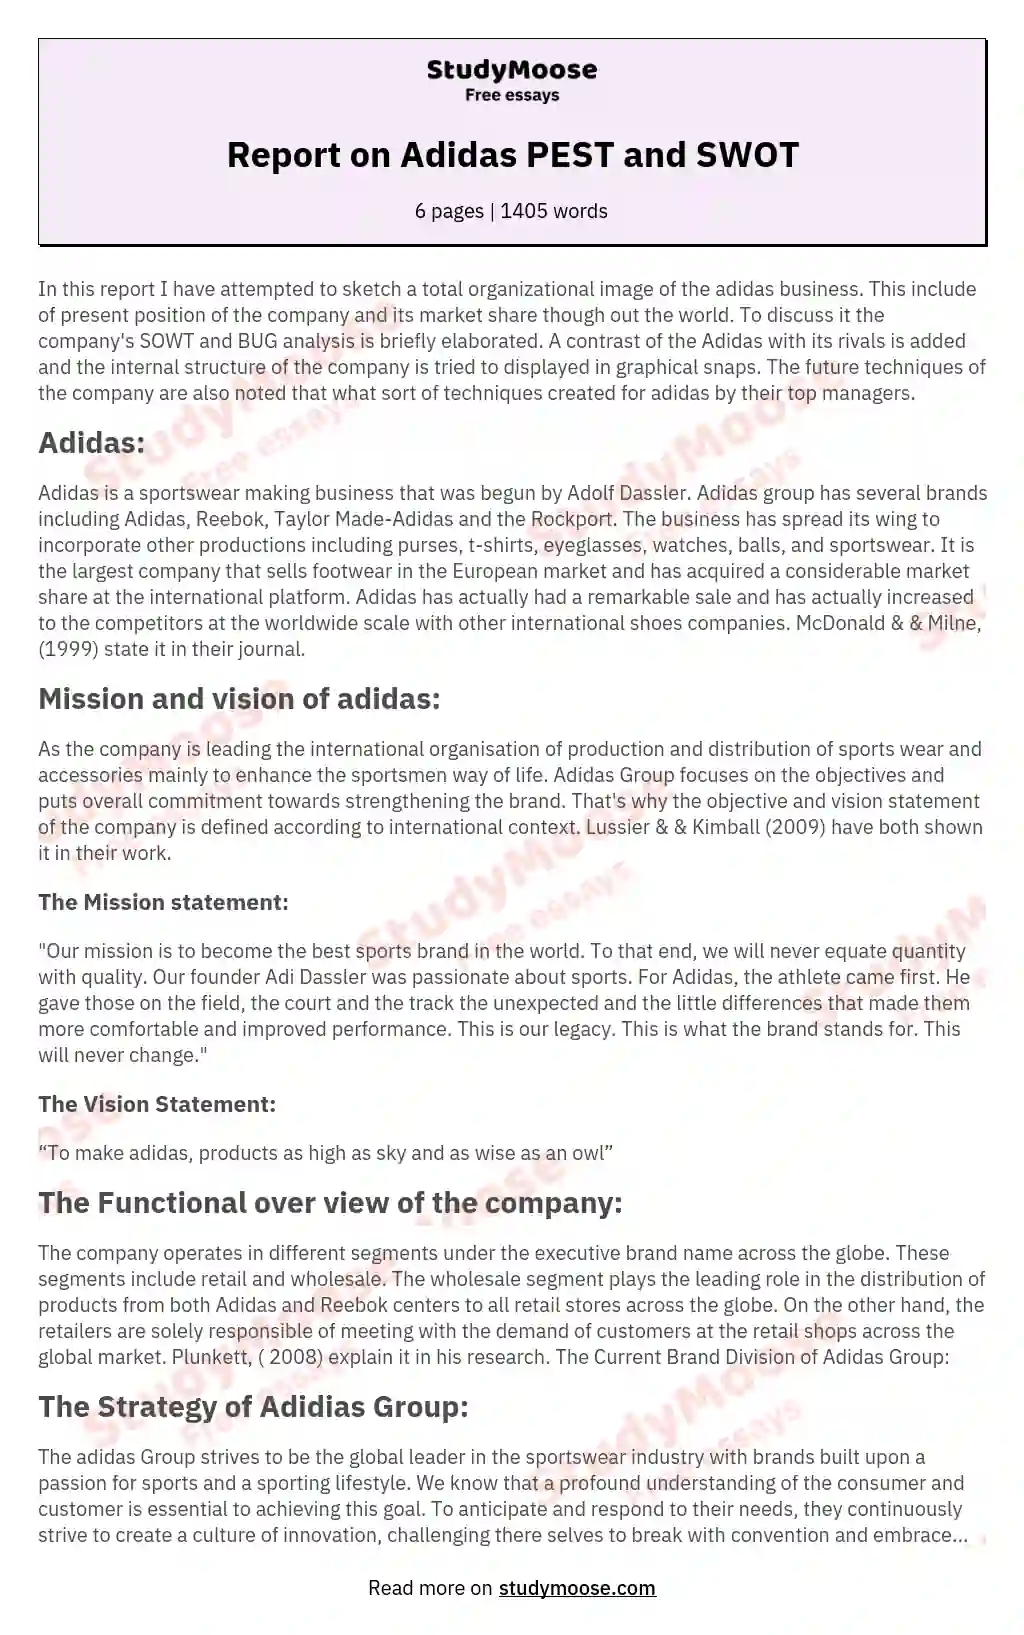 Report on Adidas PEST and SWOT